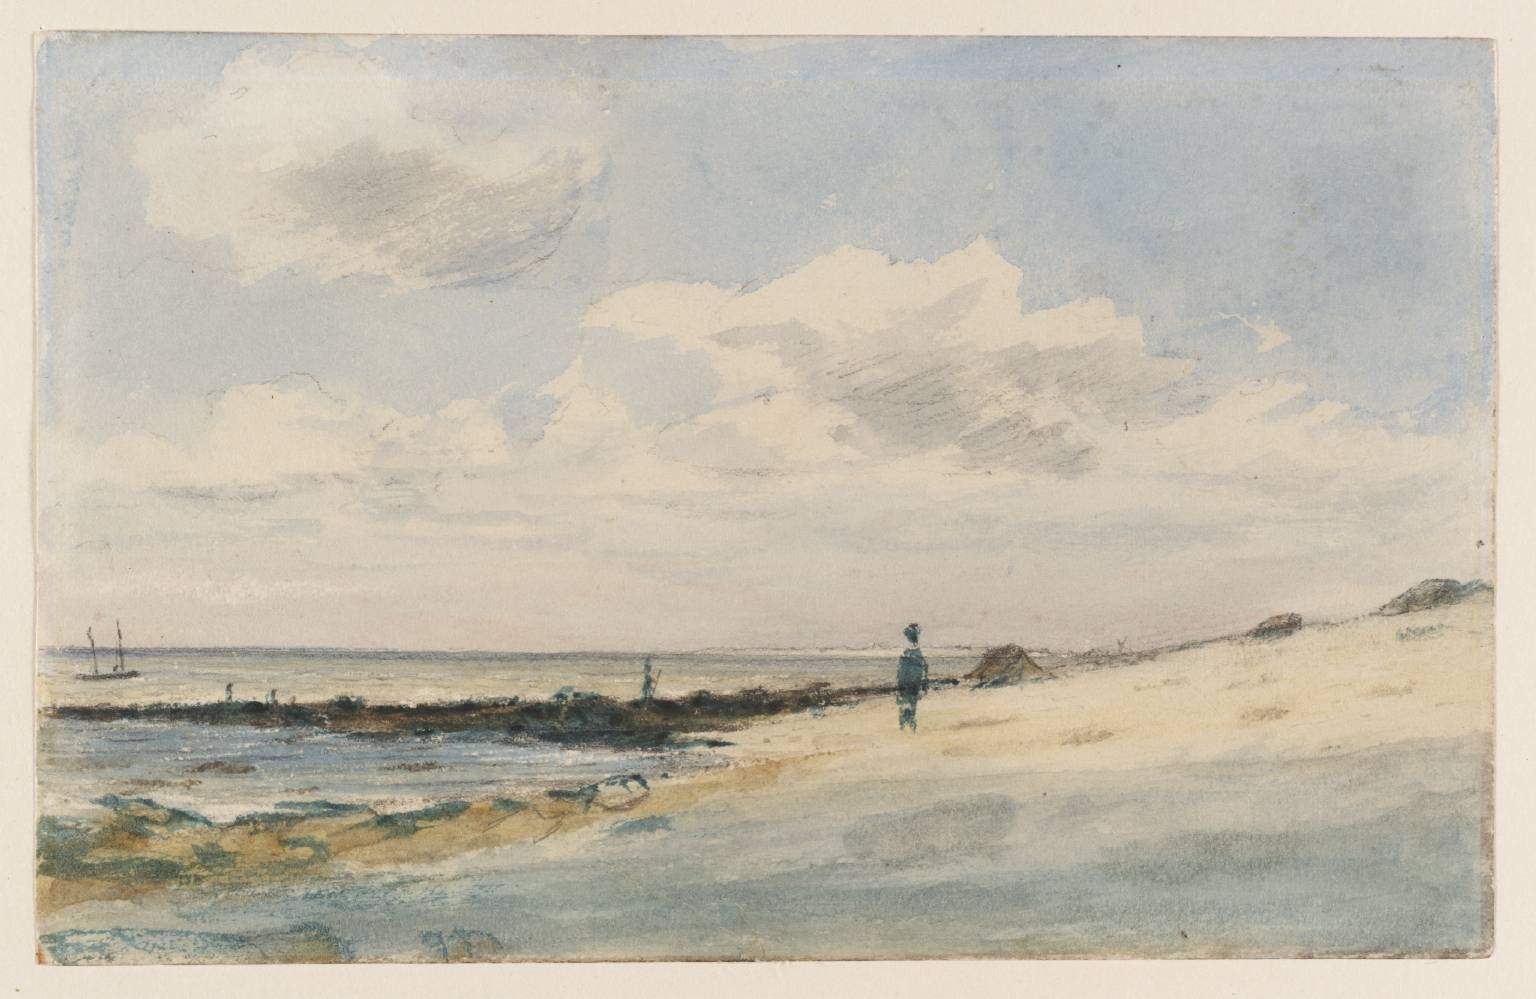 Between Folkestone and Sandgate 1833 by John Constable 1776-1837